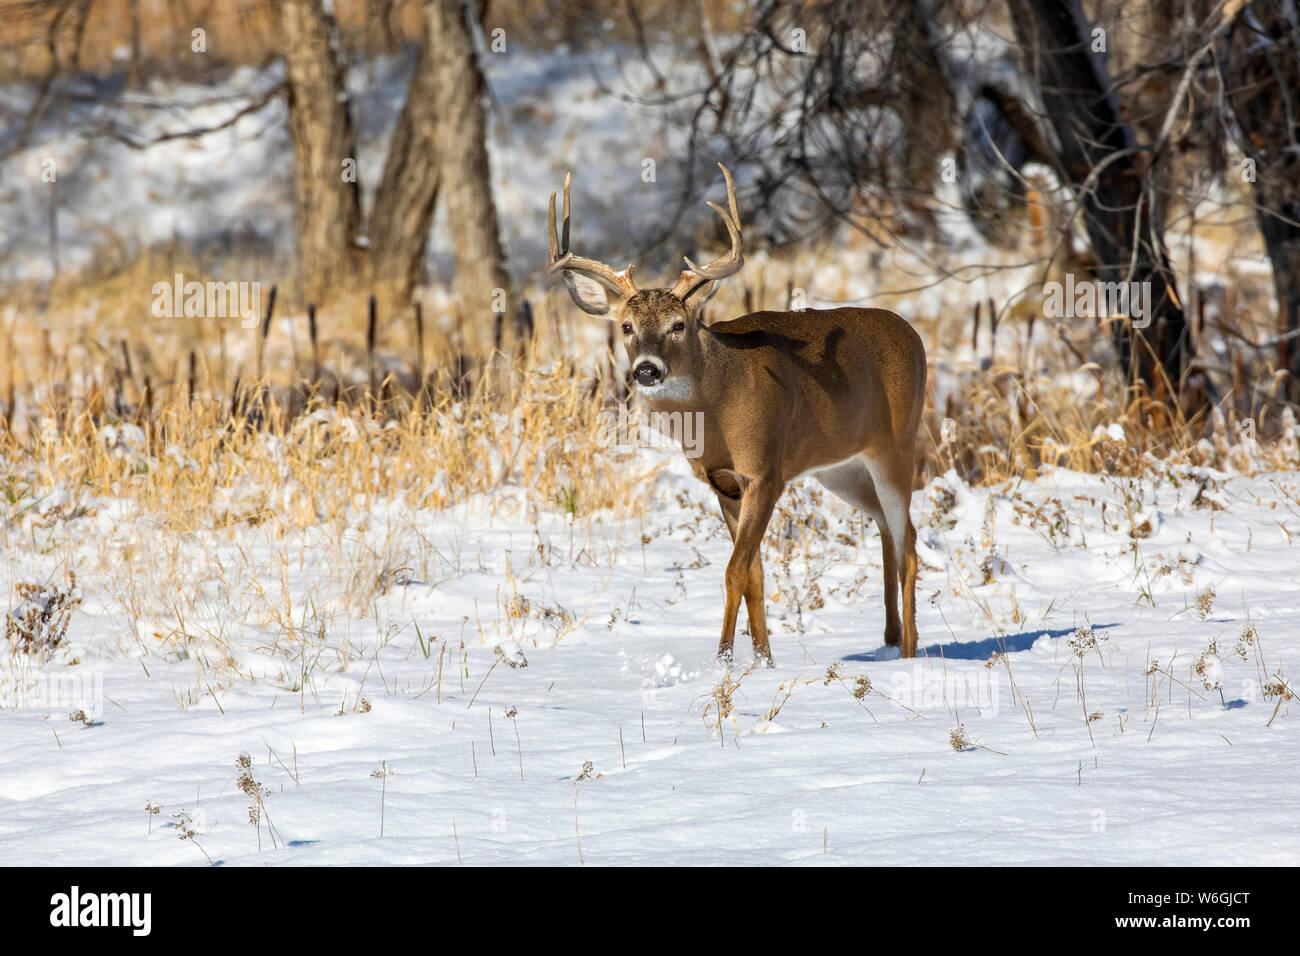 White-tailed deer (Odocoileus virginianus) buck walking in a snowy field; Denver, Colorado, United States of America Stock Photo